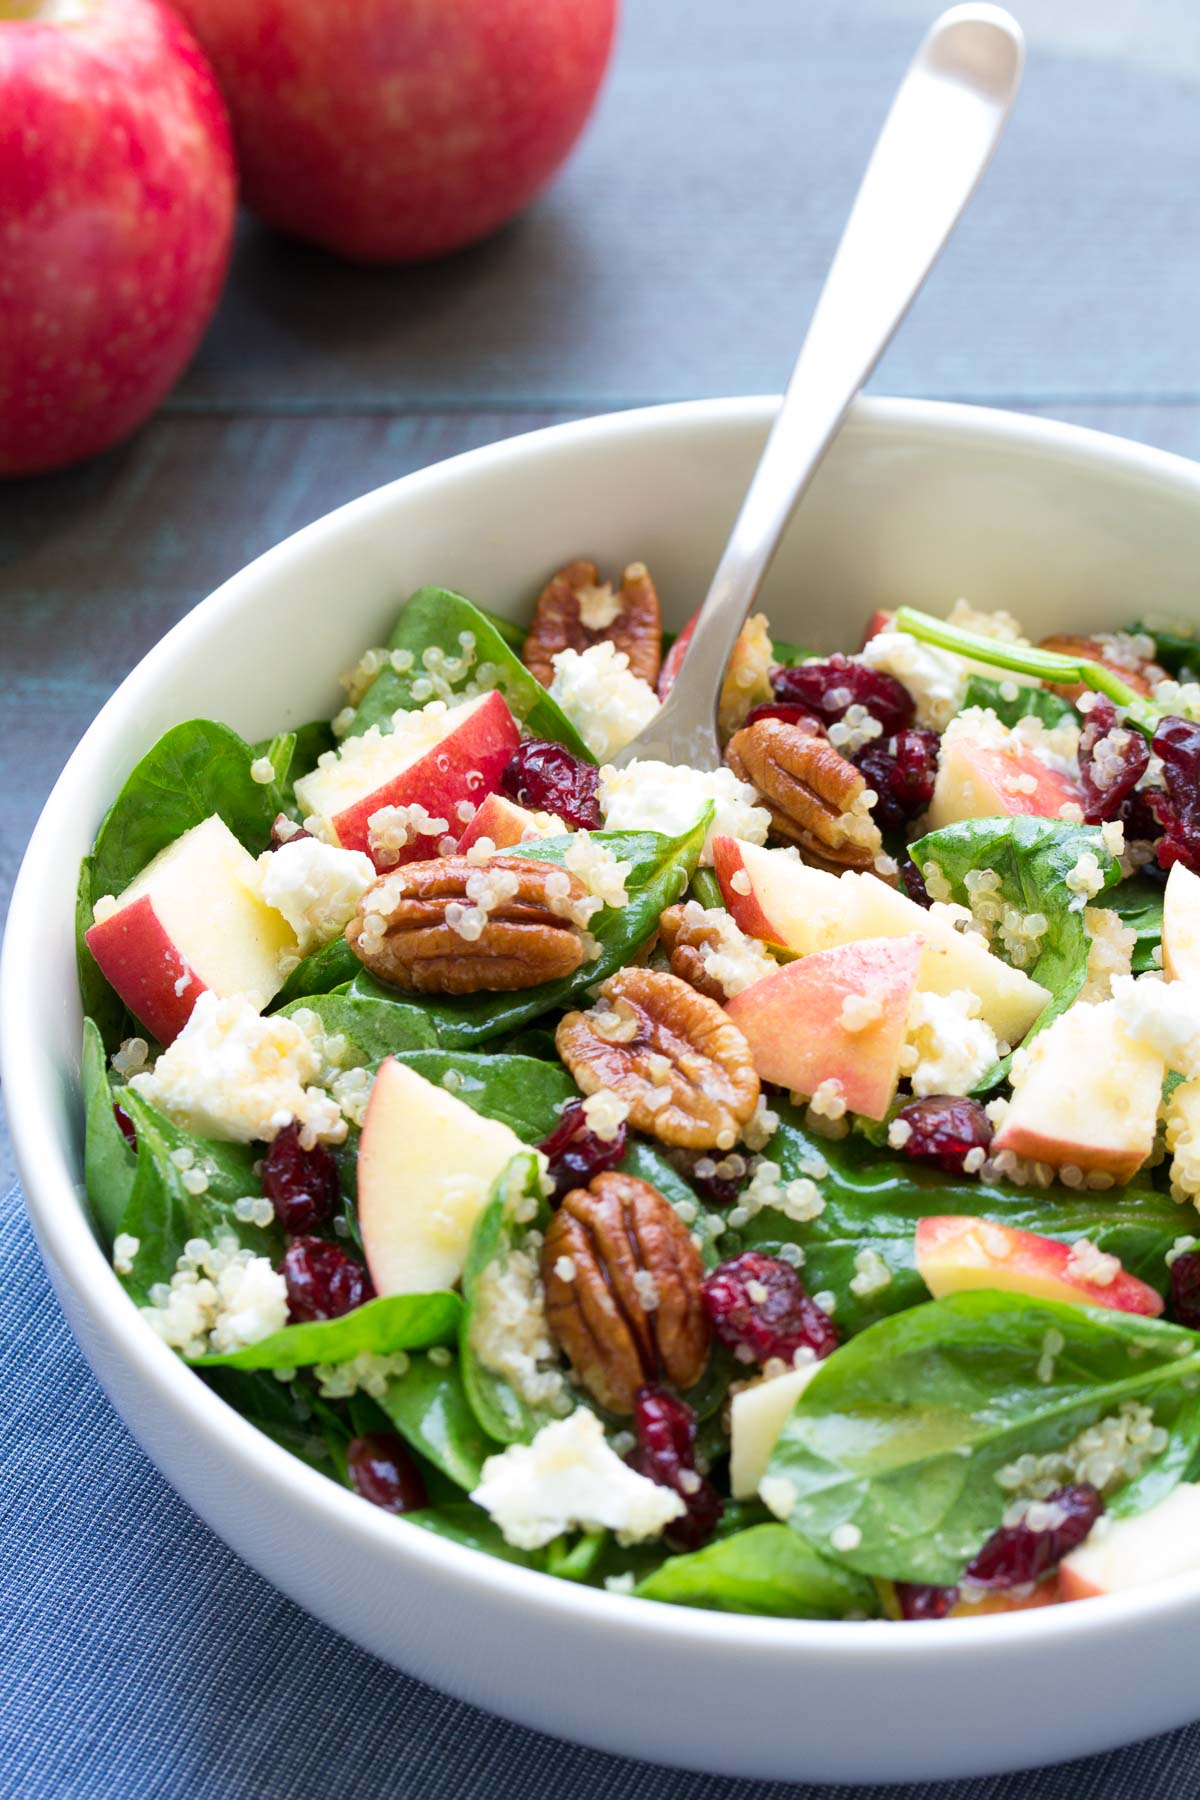 Spinach and Quinoa Salad with Apple and Pecans served in a bowl with a fork.